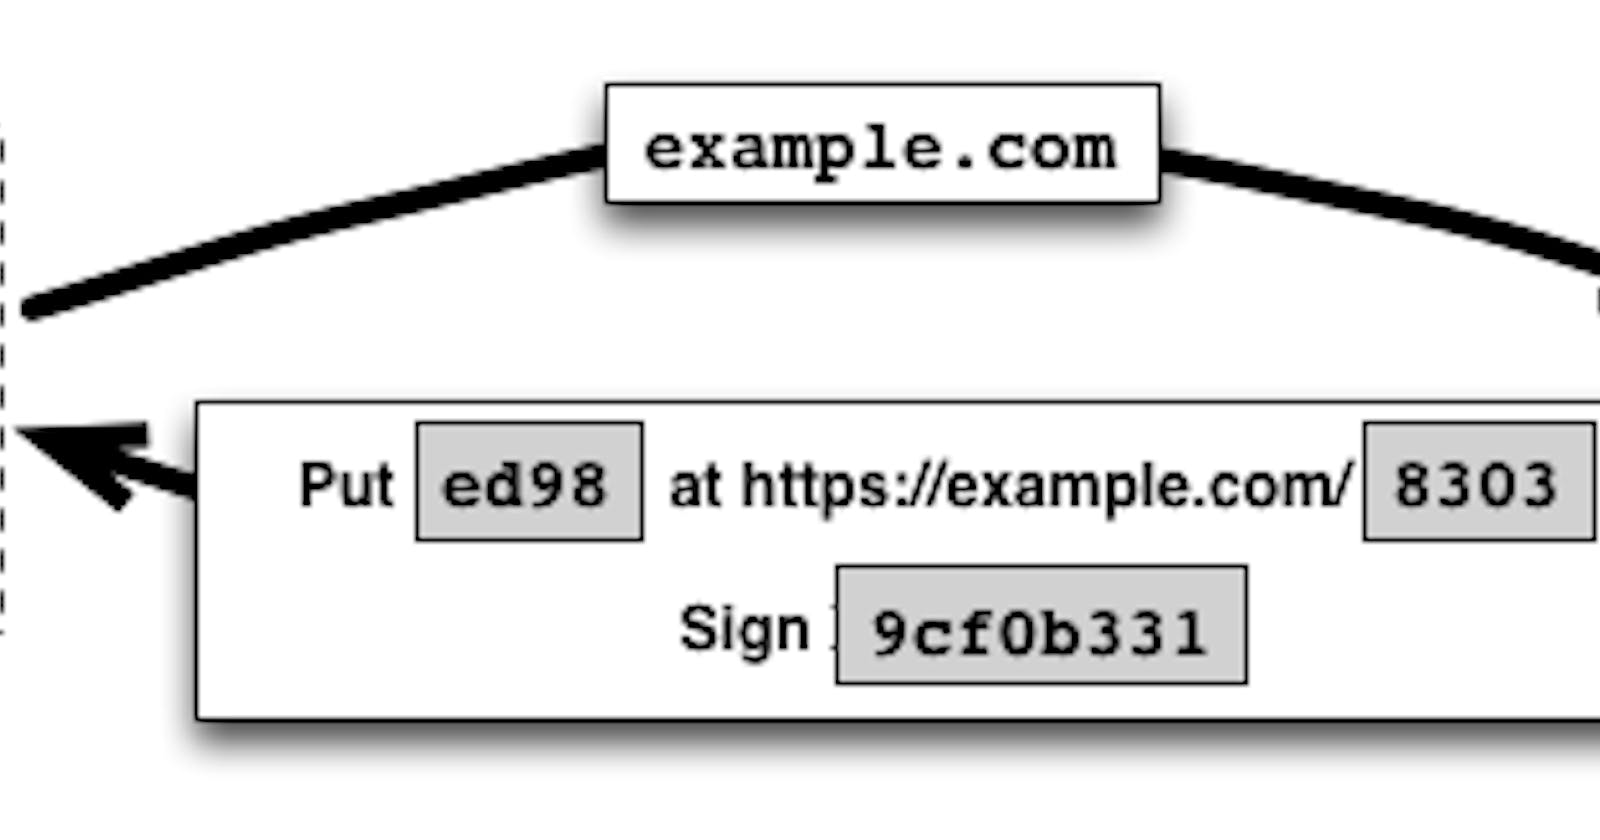 Securing Your Website: A Guide to Generating SSL Certificates with Certbot and Let's Encrypt"